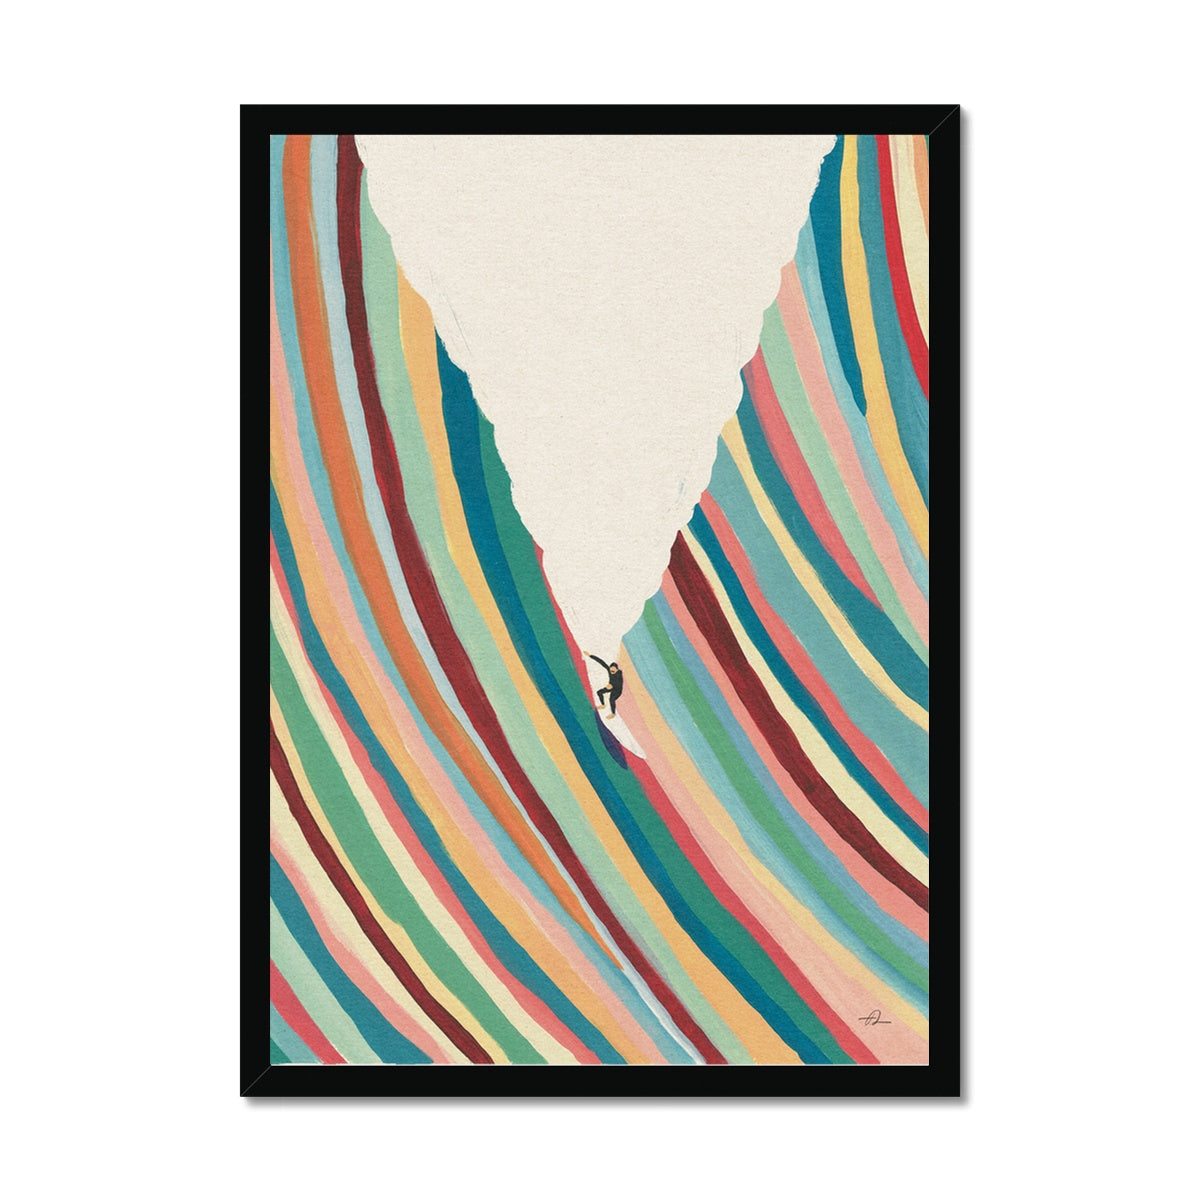 Surfing with Stache Framed Print